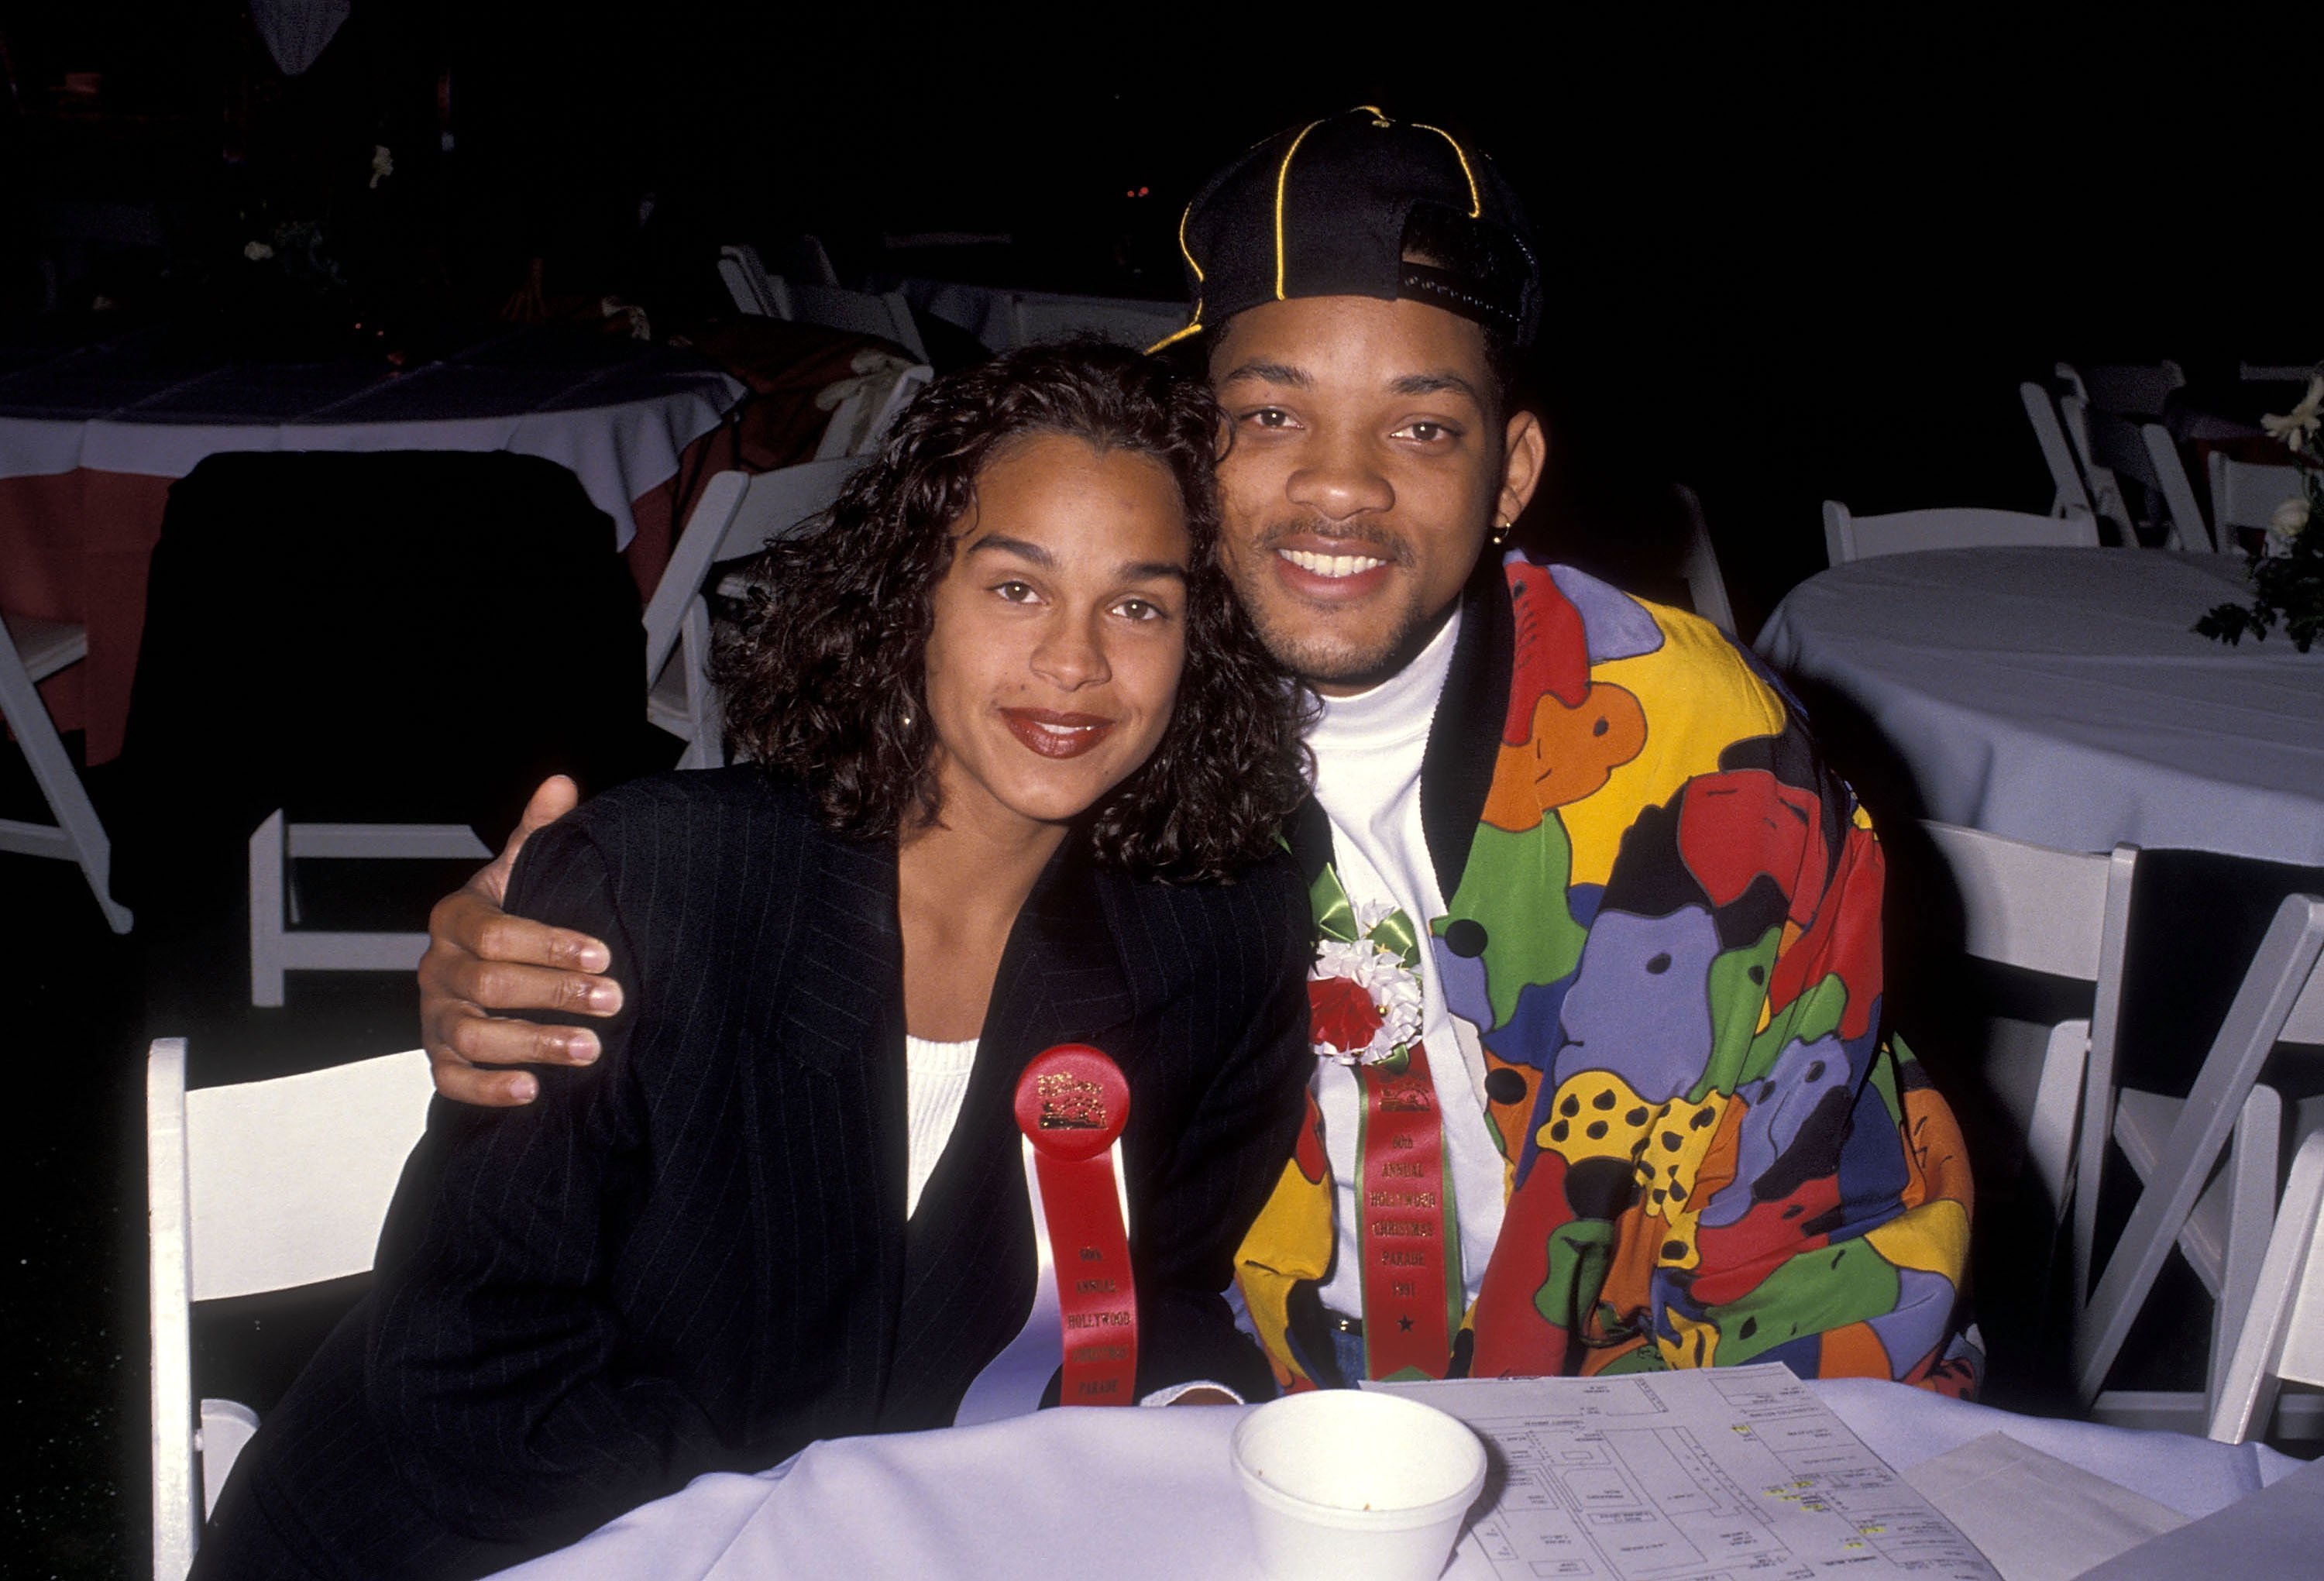 Will Smith and Sheree Zampino attend the 60th Annual Hollywood Christmas Parade on December 1, 1991 in Hollywood, California. | Source: Getty Images